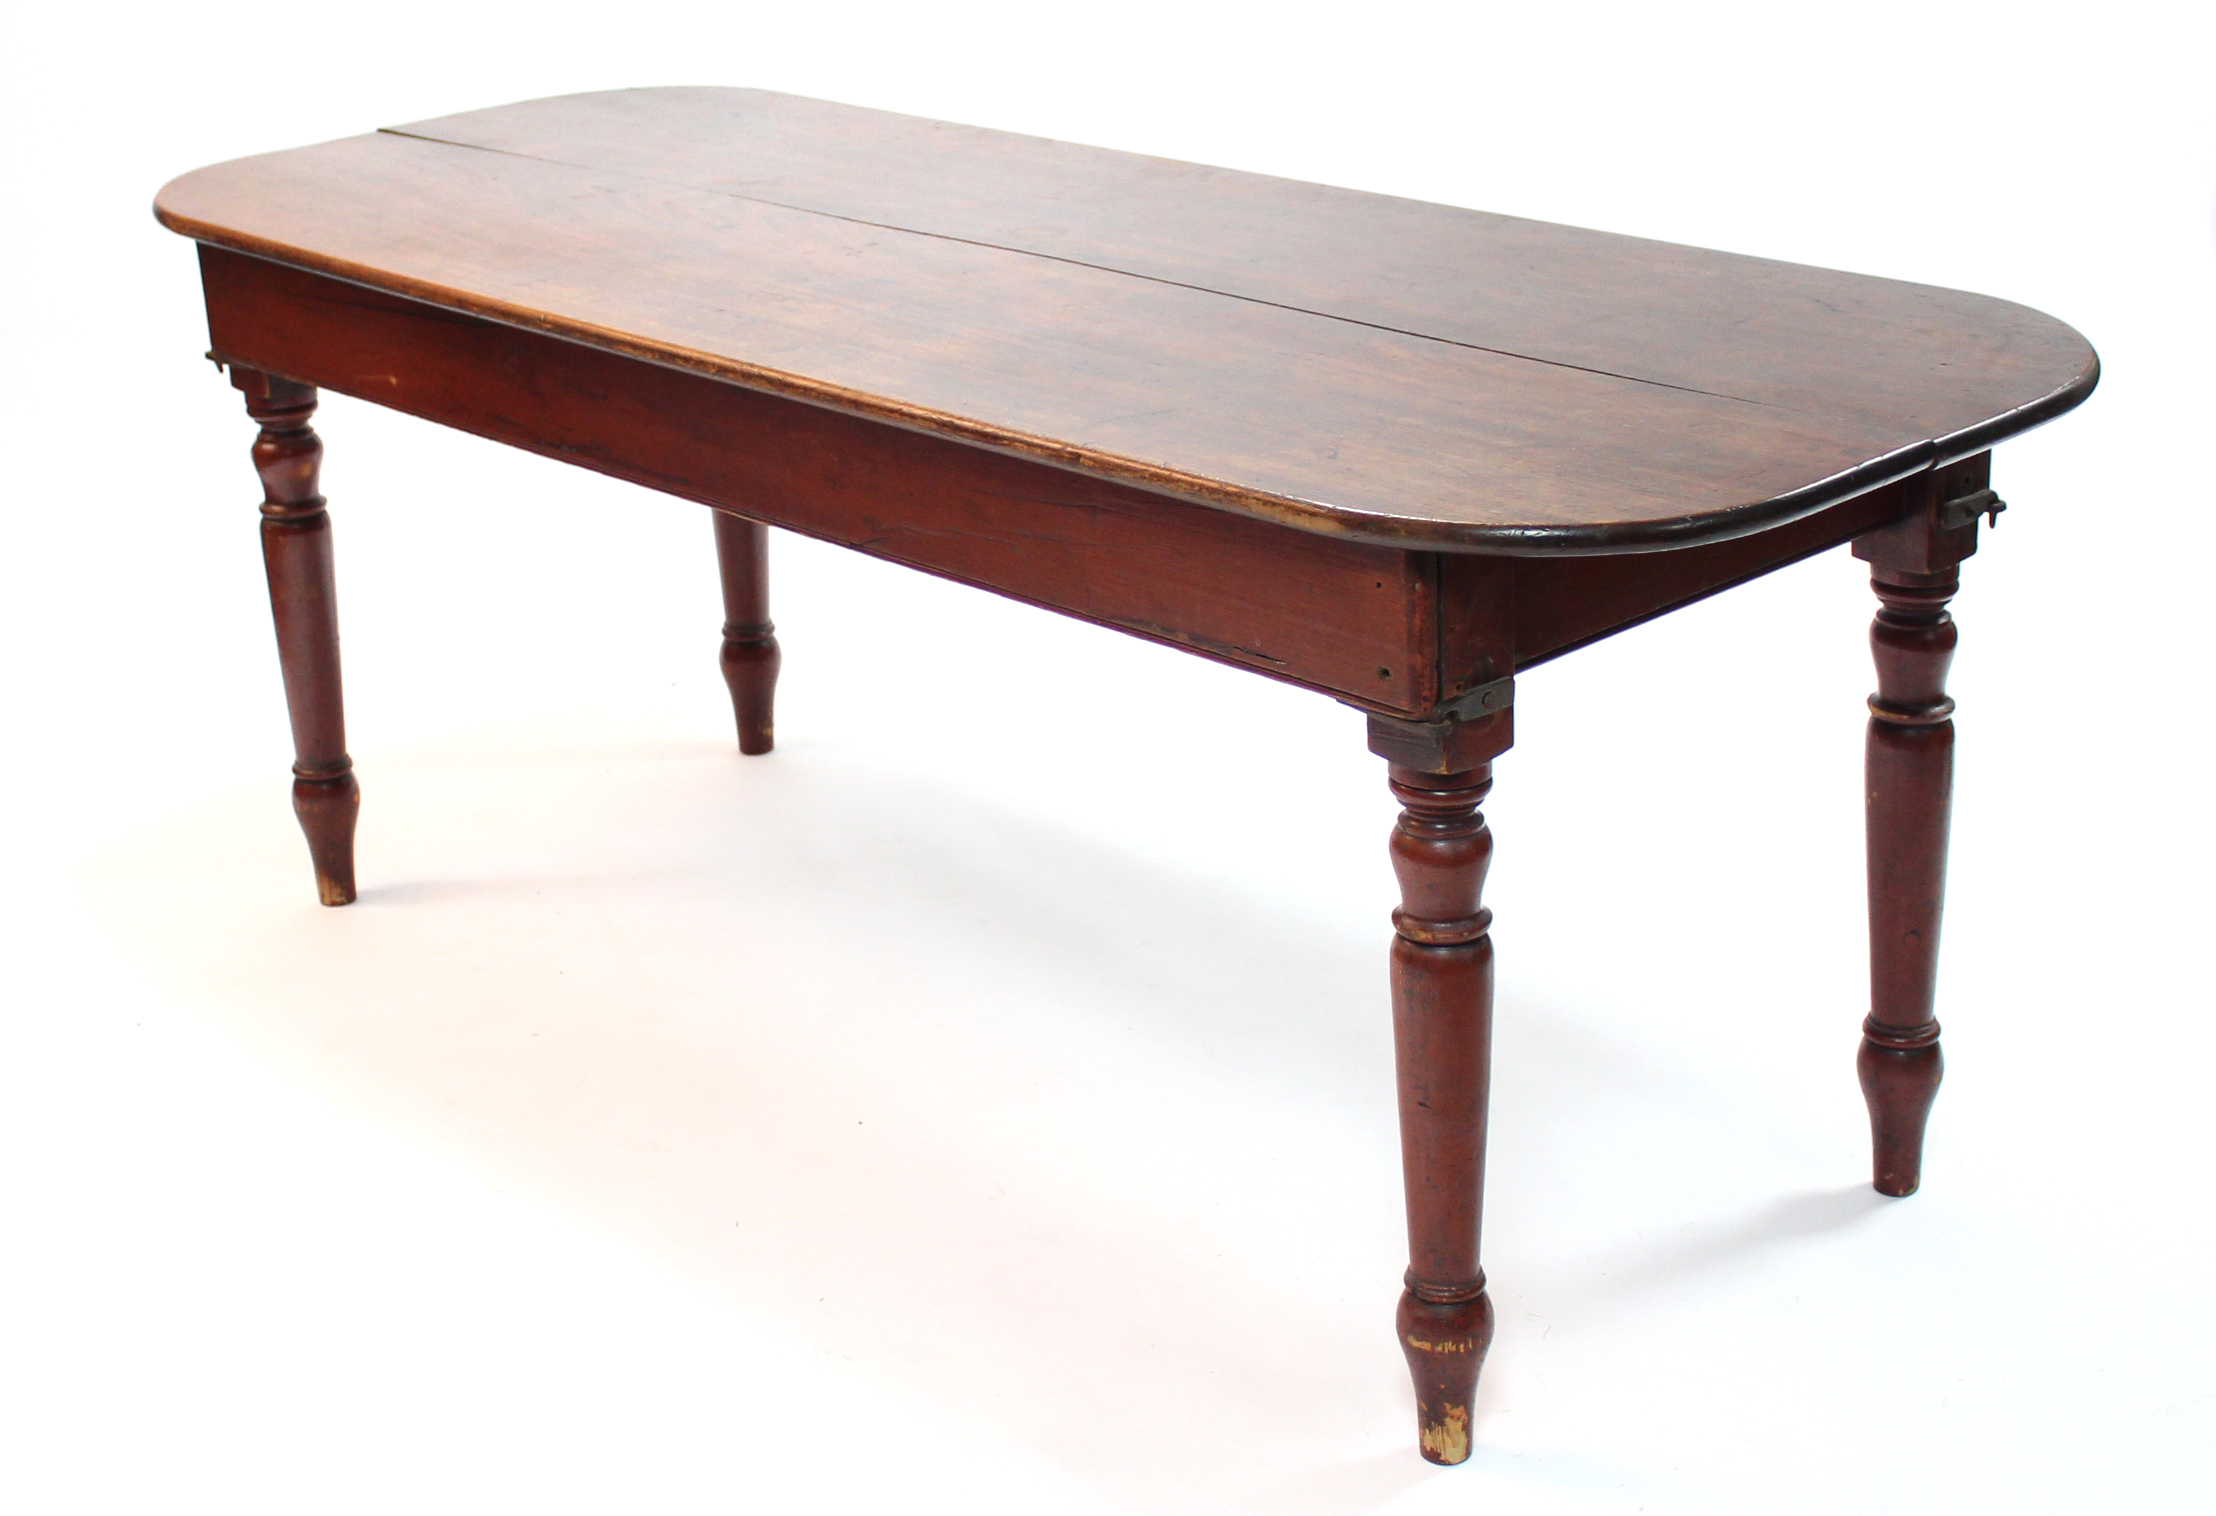 A Victorian mahogany rectangular portable serving table with rounded corners, on turned tapering